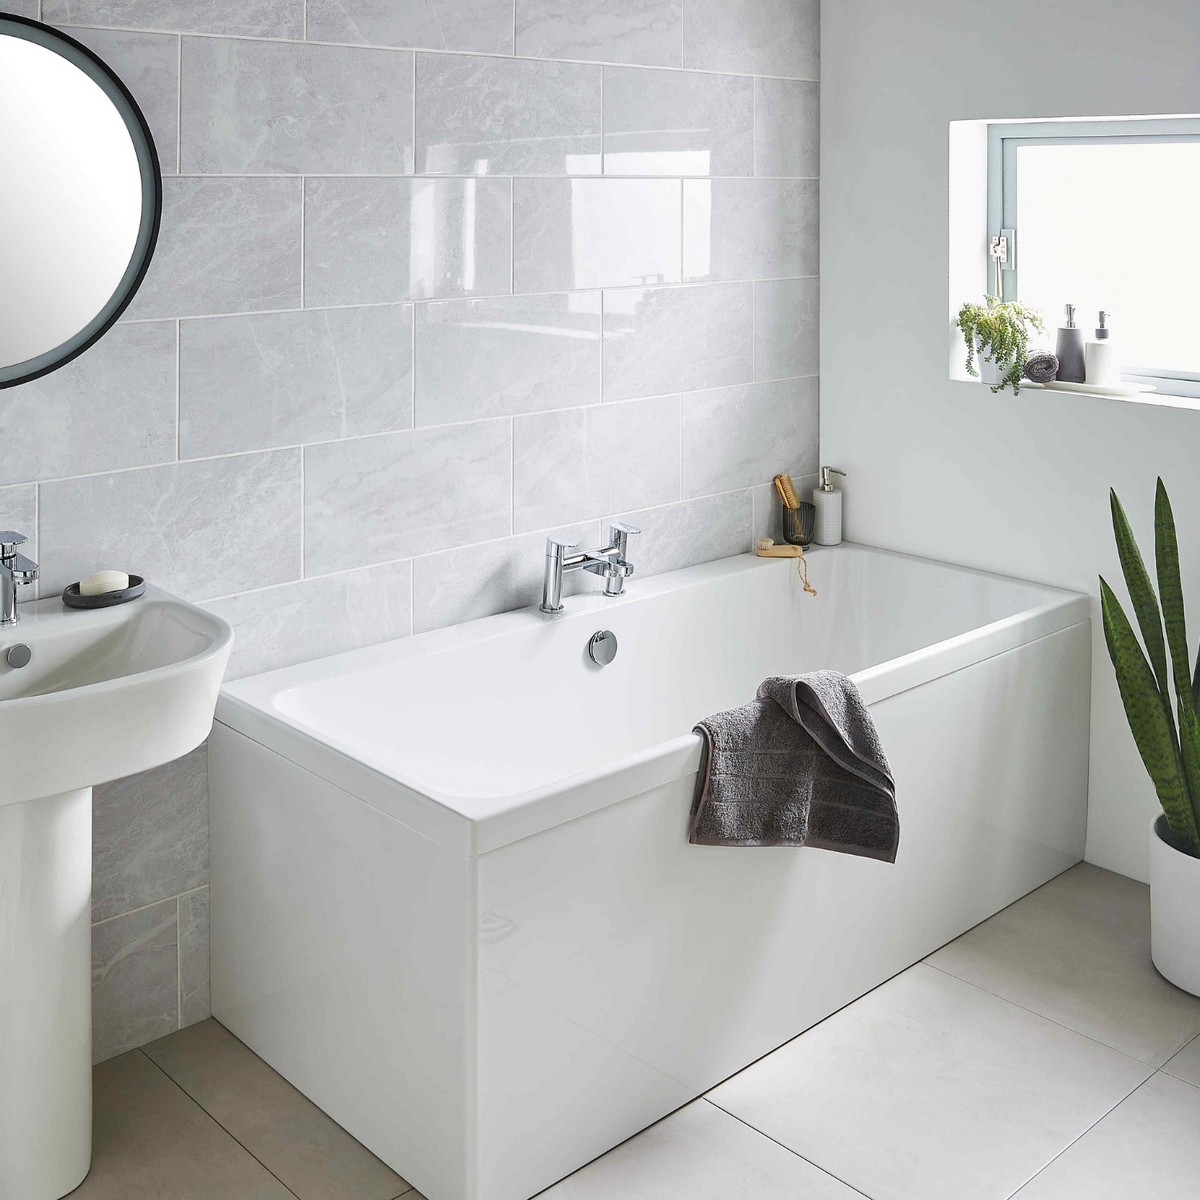 Upgrade Your Bath with a Stylish 1000mm Trim White Bathroom Suit including Vanity Unit & Toilet